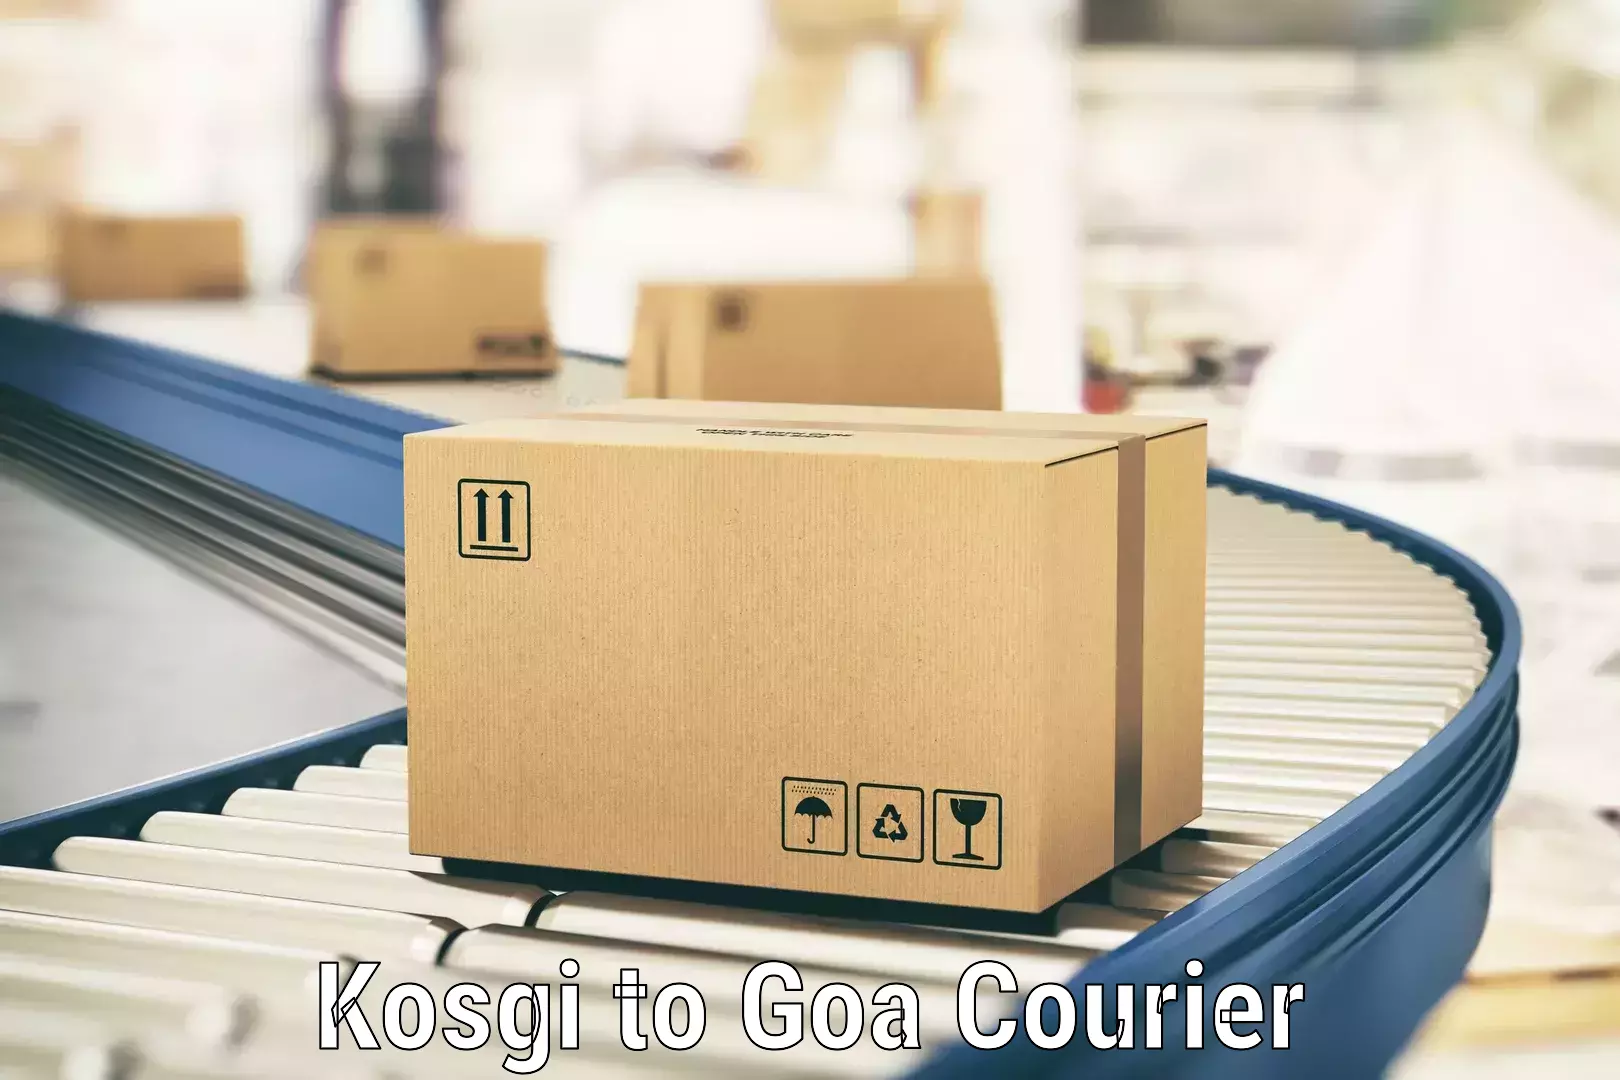 Express delivery capabilities Kosgi to South Goa